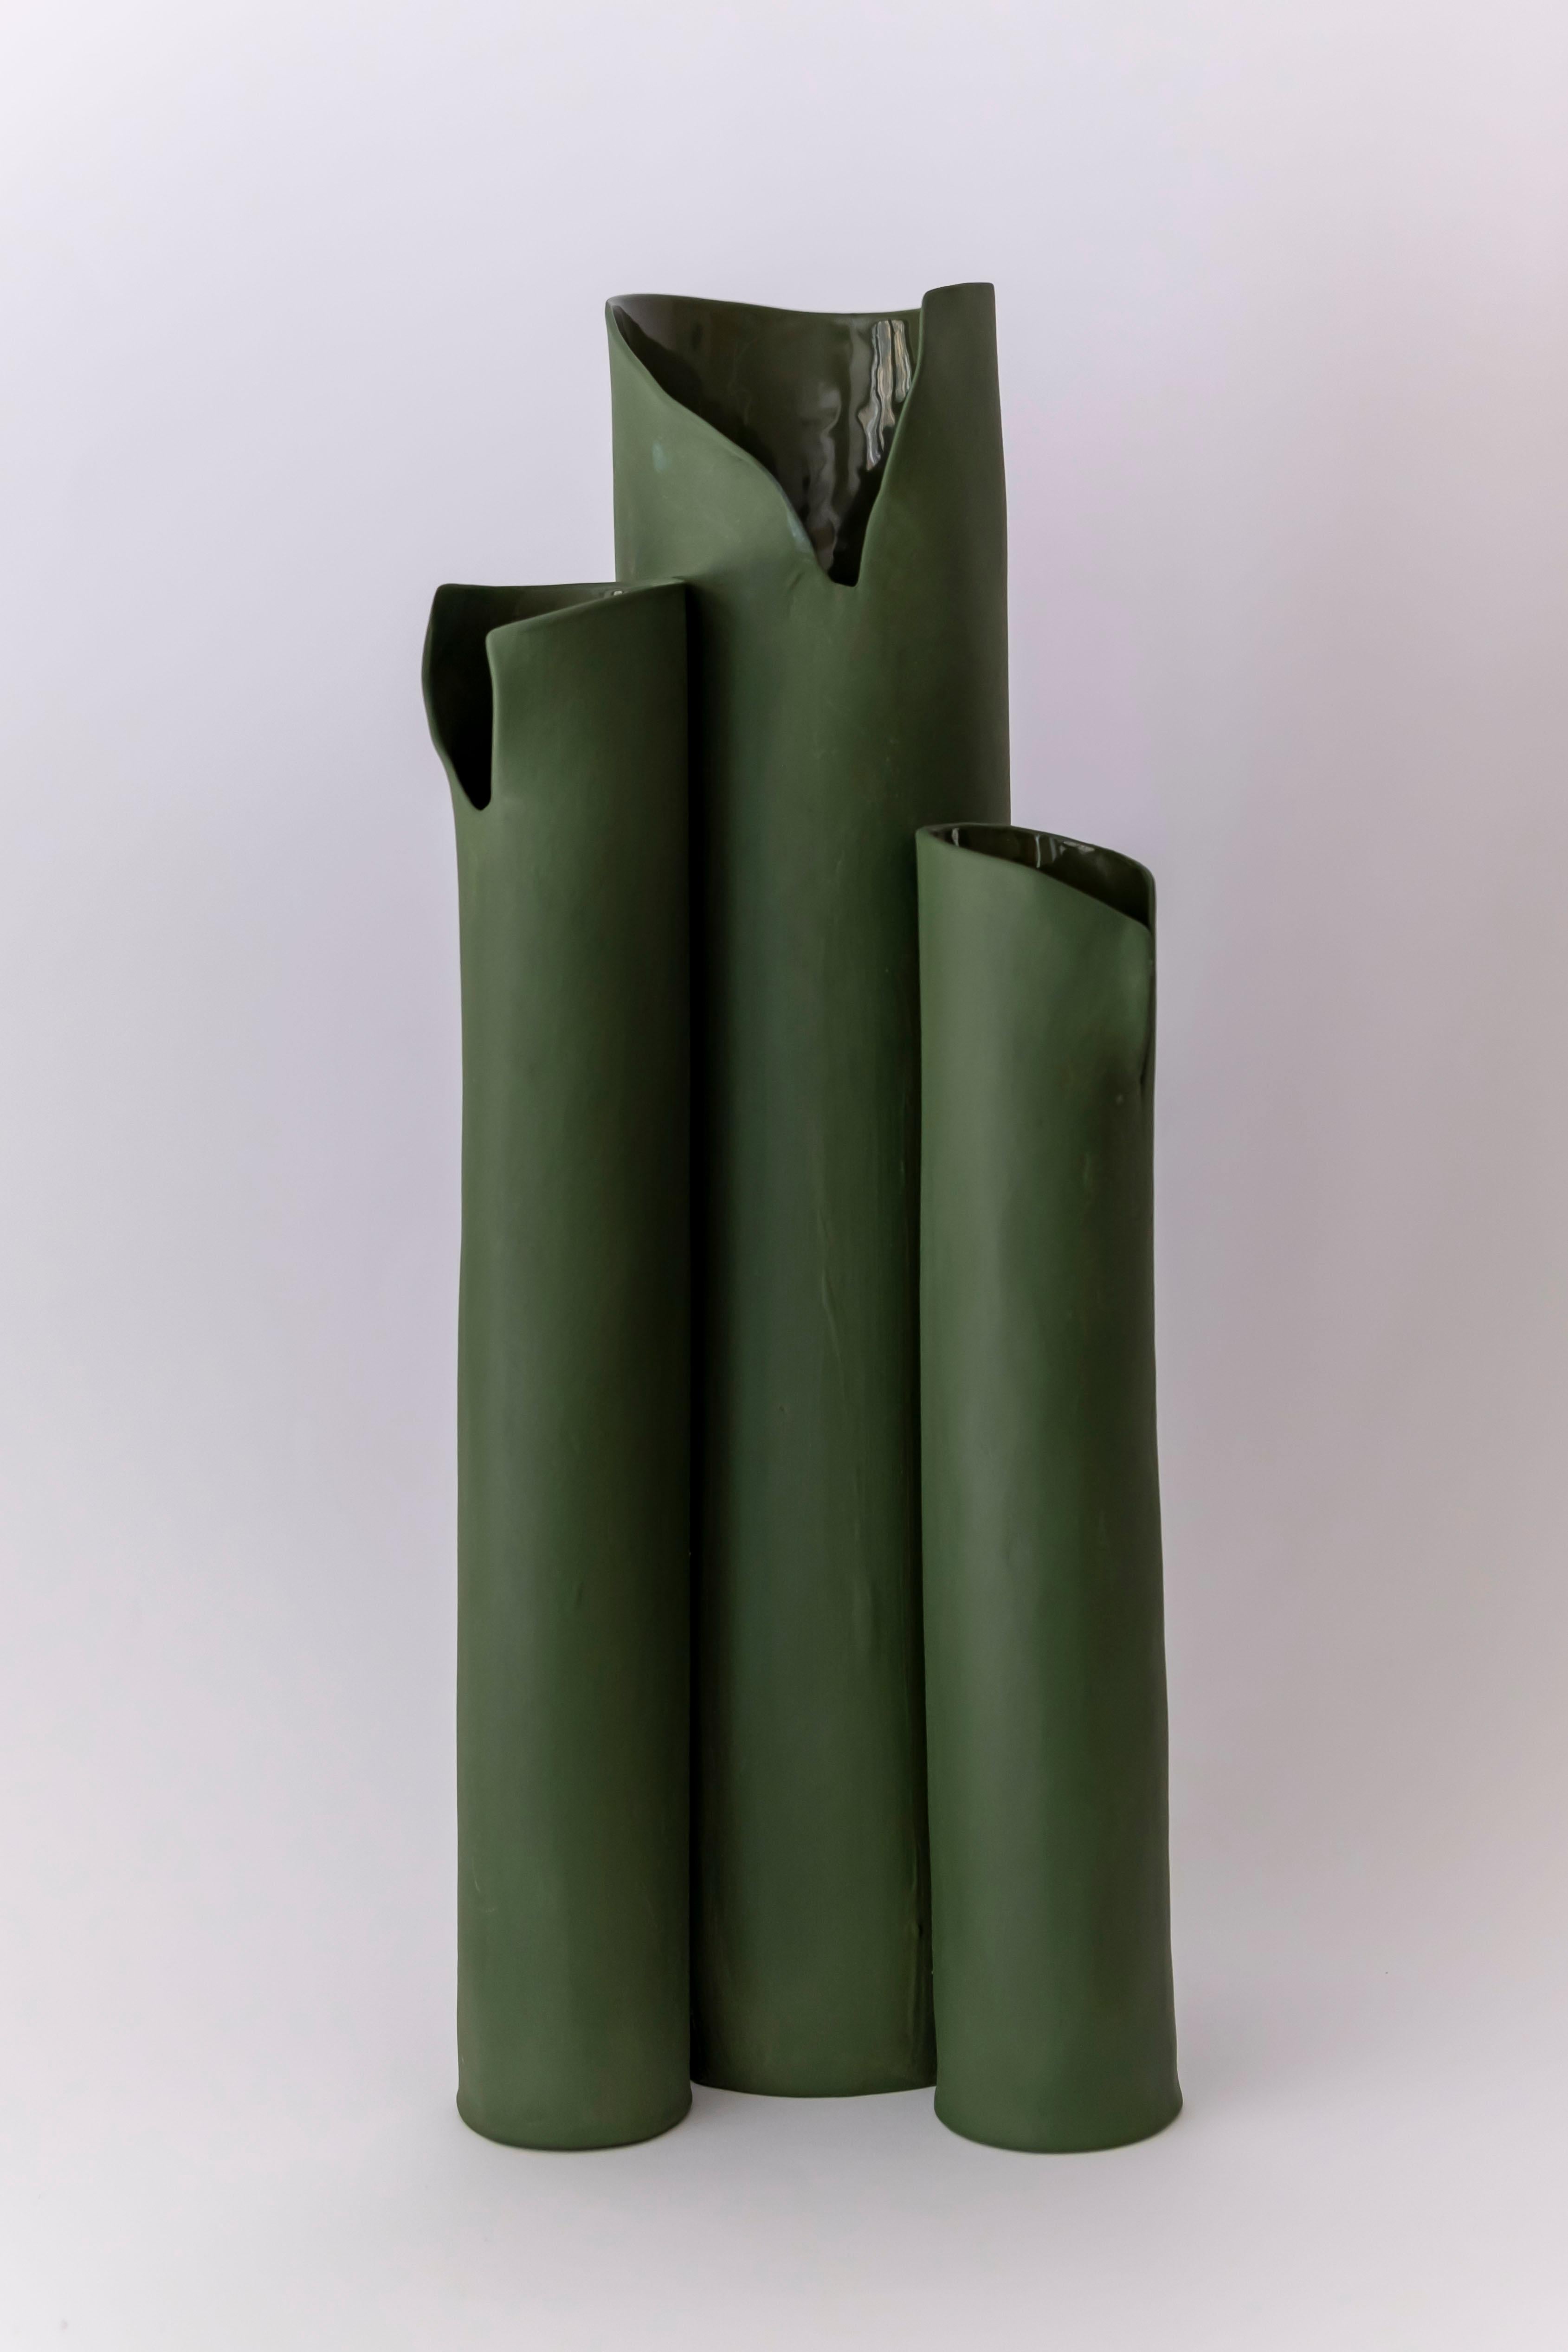 Trio Olive Green Vase by Biancodichina
Unique piece.
Dimensions: D 16 x W 25 x H 37 cm. 
Materials: Limoges porcelain. Glazed and glossy finish inside, bisque and silky finish outside.

These vases are completely handmade using a slab building